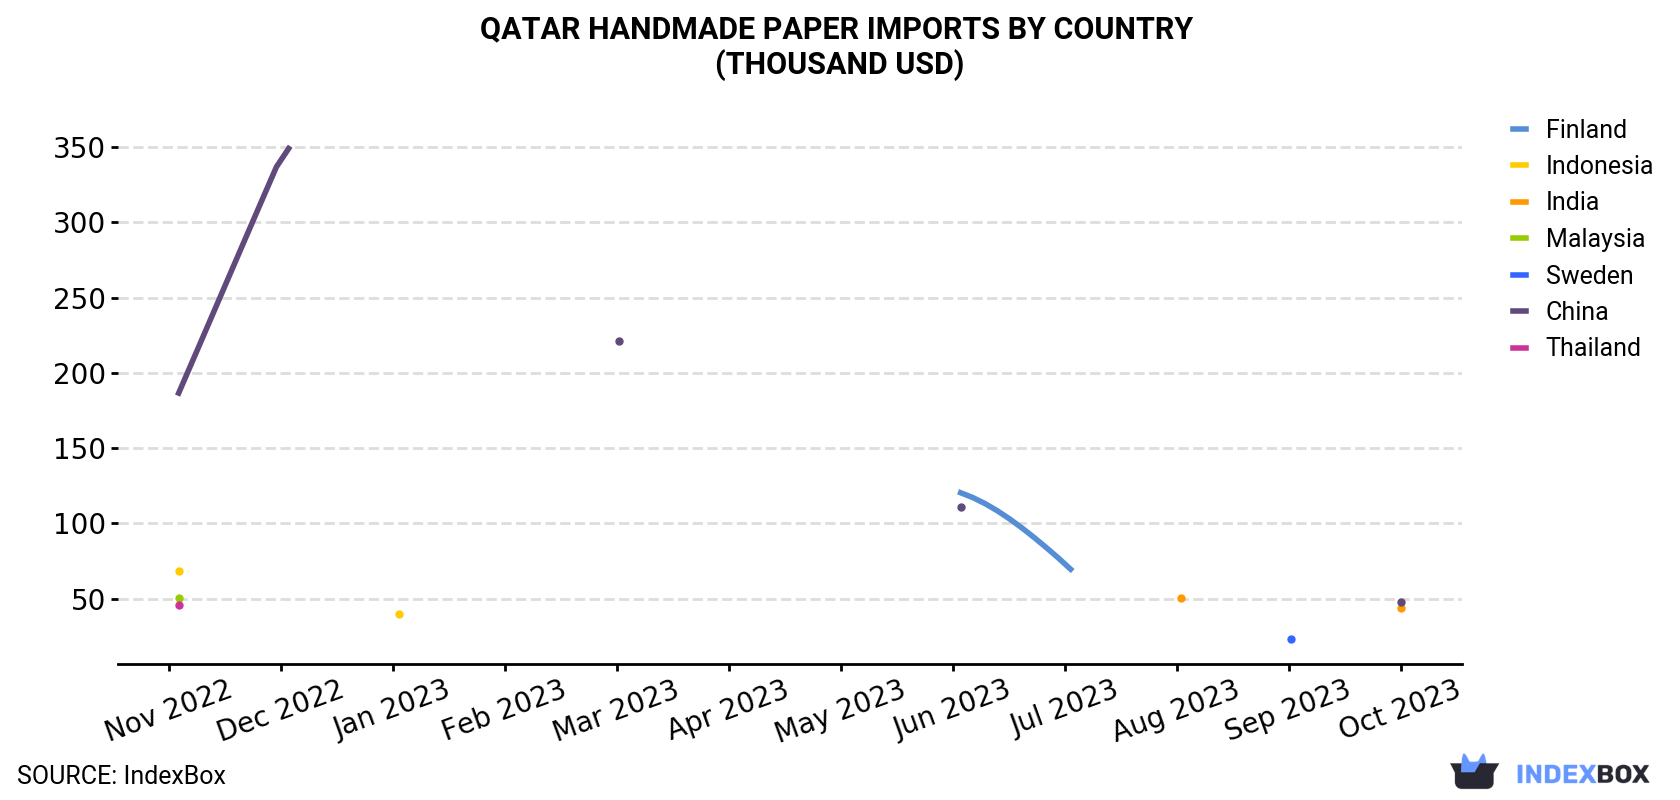 Qatar Handmade Paper Imports By Country (Thousand USD)